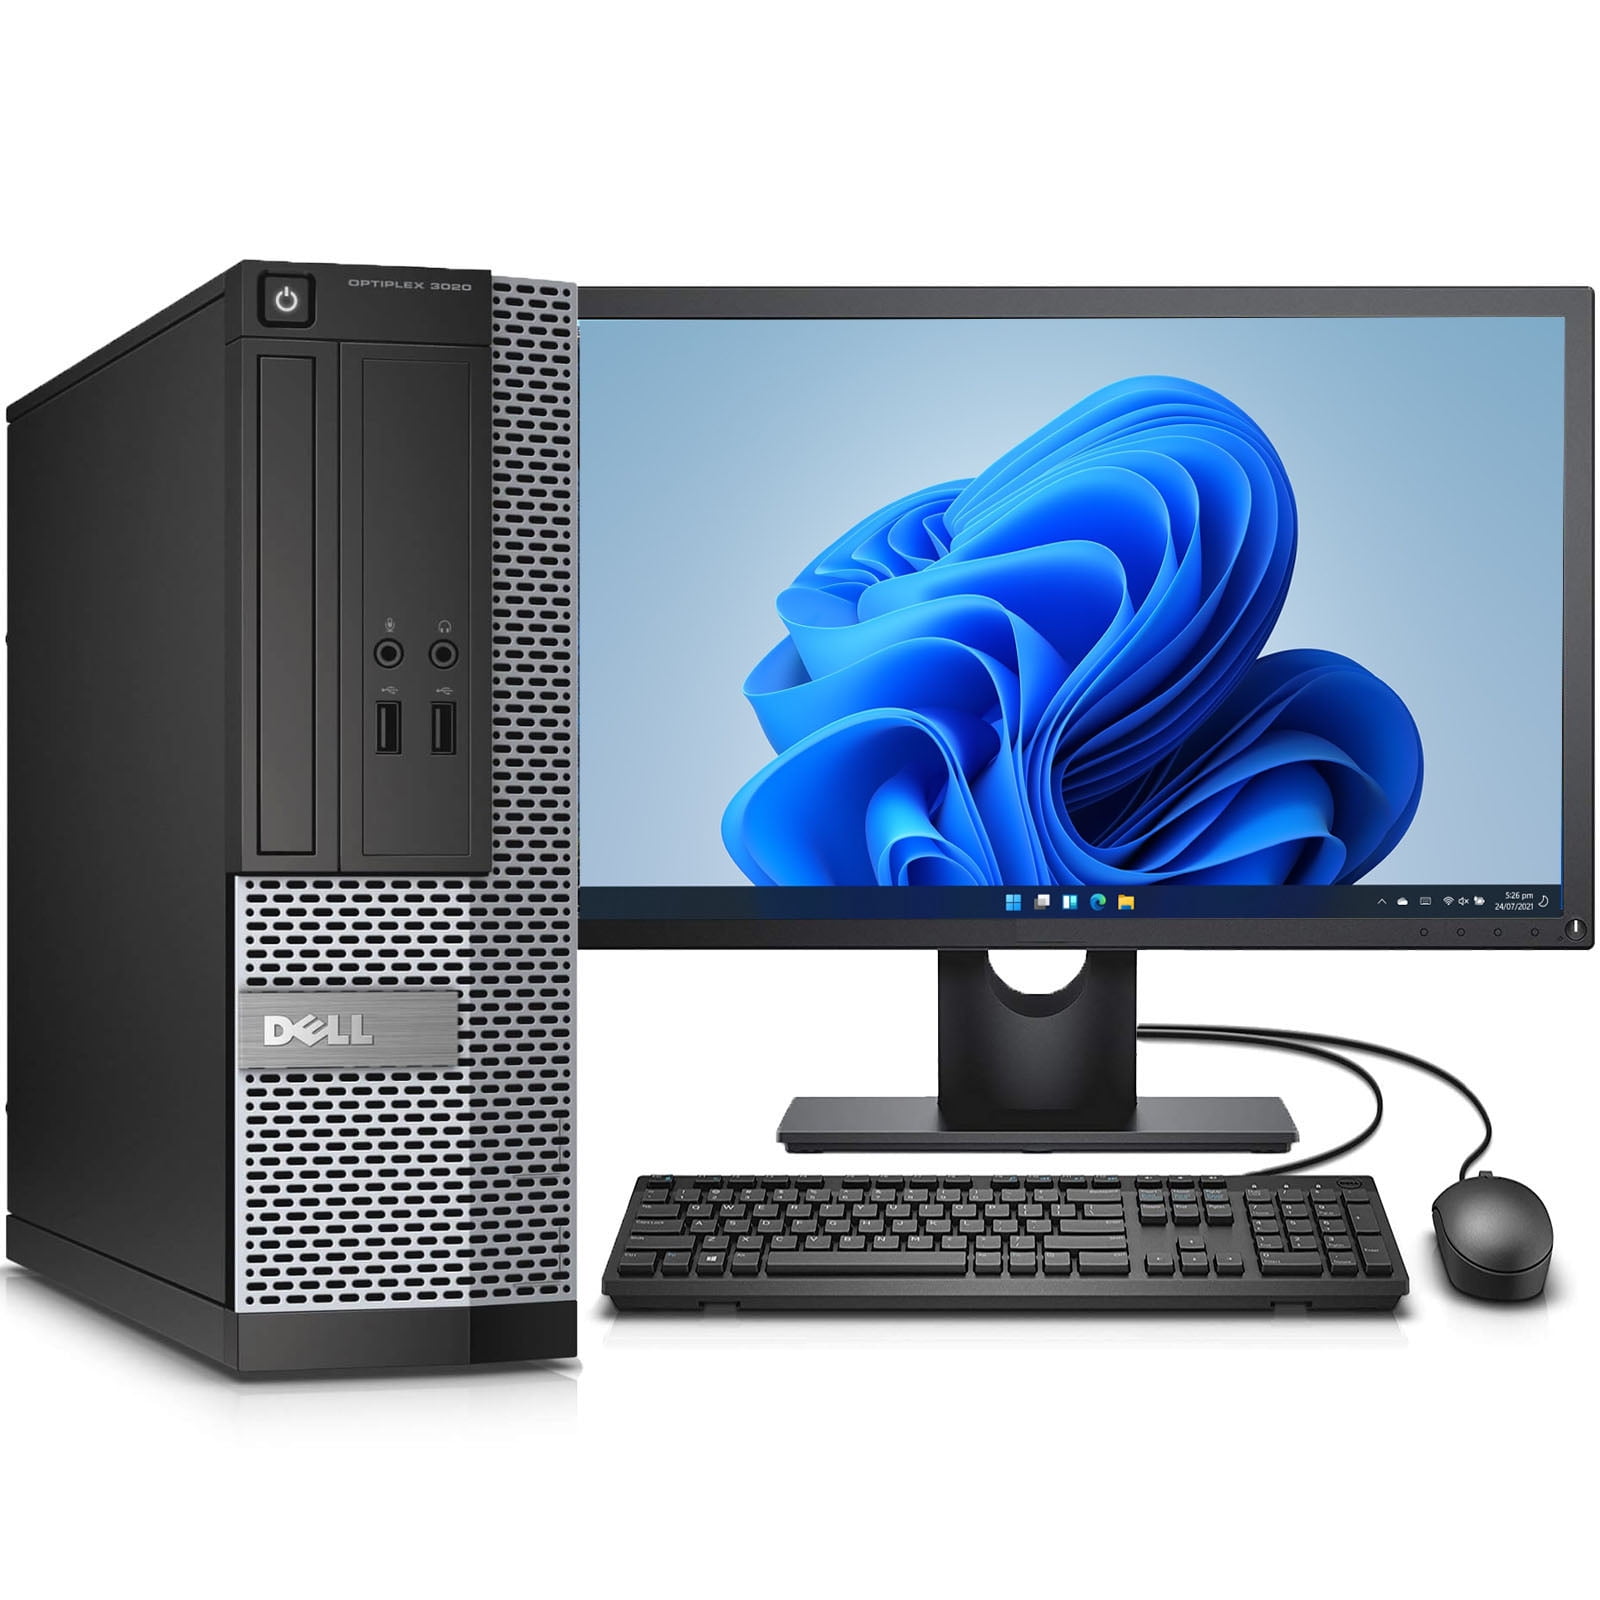 Dell OptiPlex 7010 SFF Desktop PC i7 3.1Ghz 16GB 480SSD DVD Wi-Fi HDMI  Windows 11 Professional Used Computer with (Monitor Not Included)